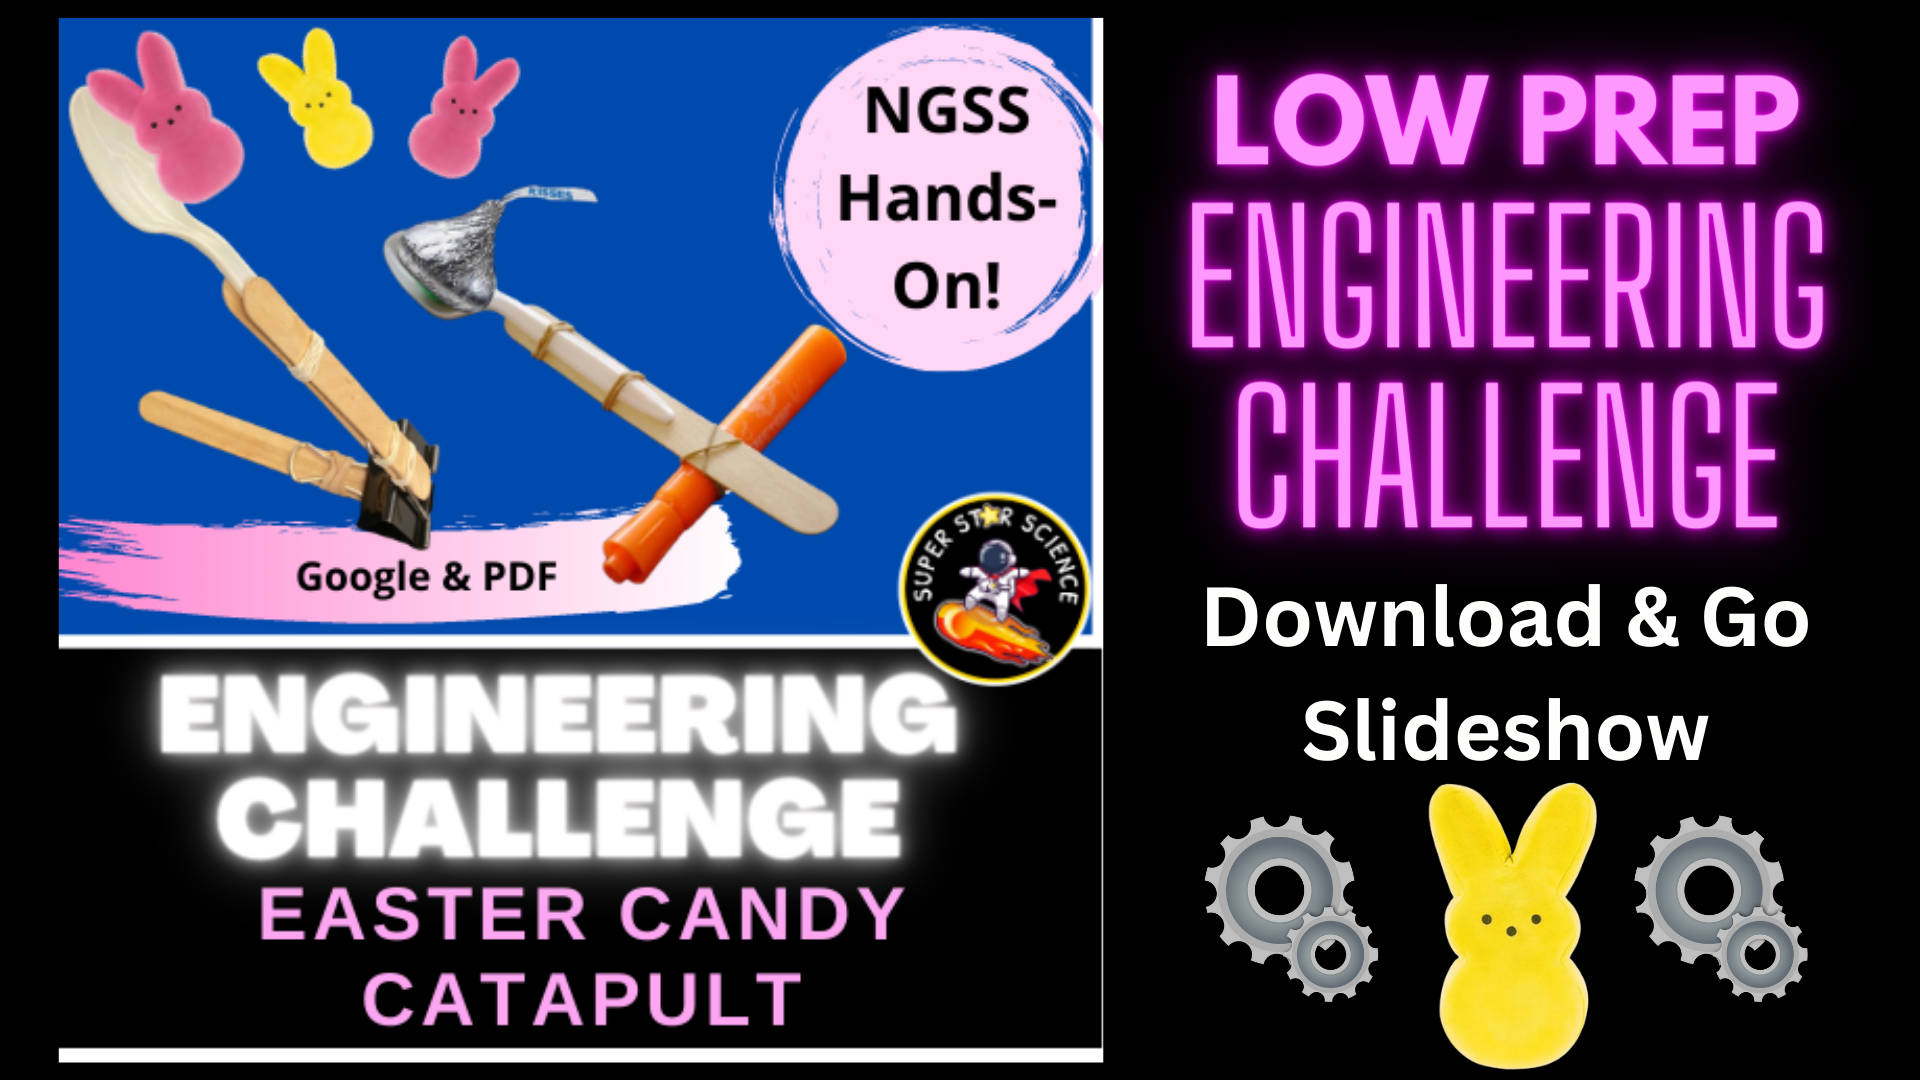 FUN Spring STEM Activity Easter Candy Catapult Engineering Design Challenge NGSS's featured image